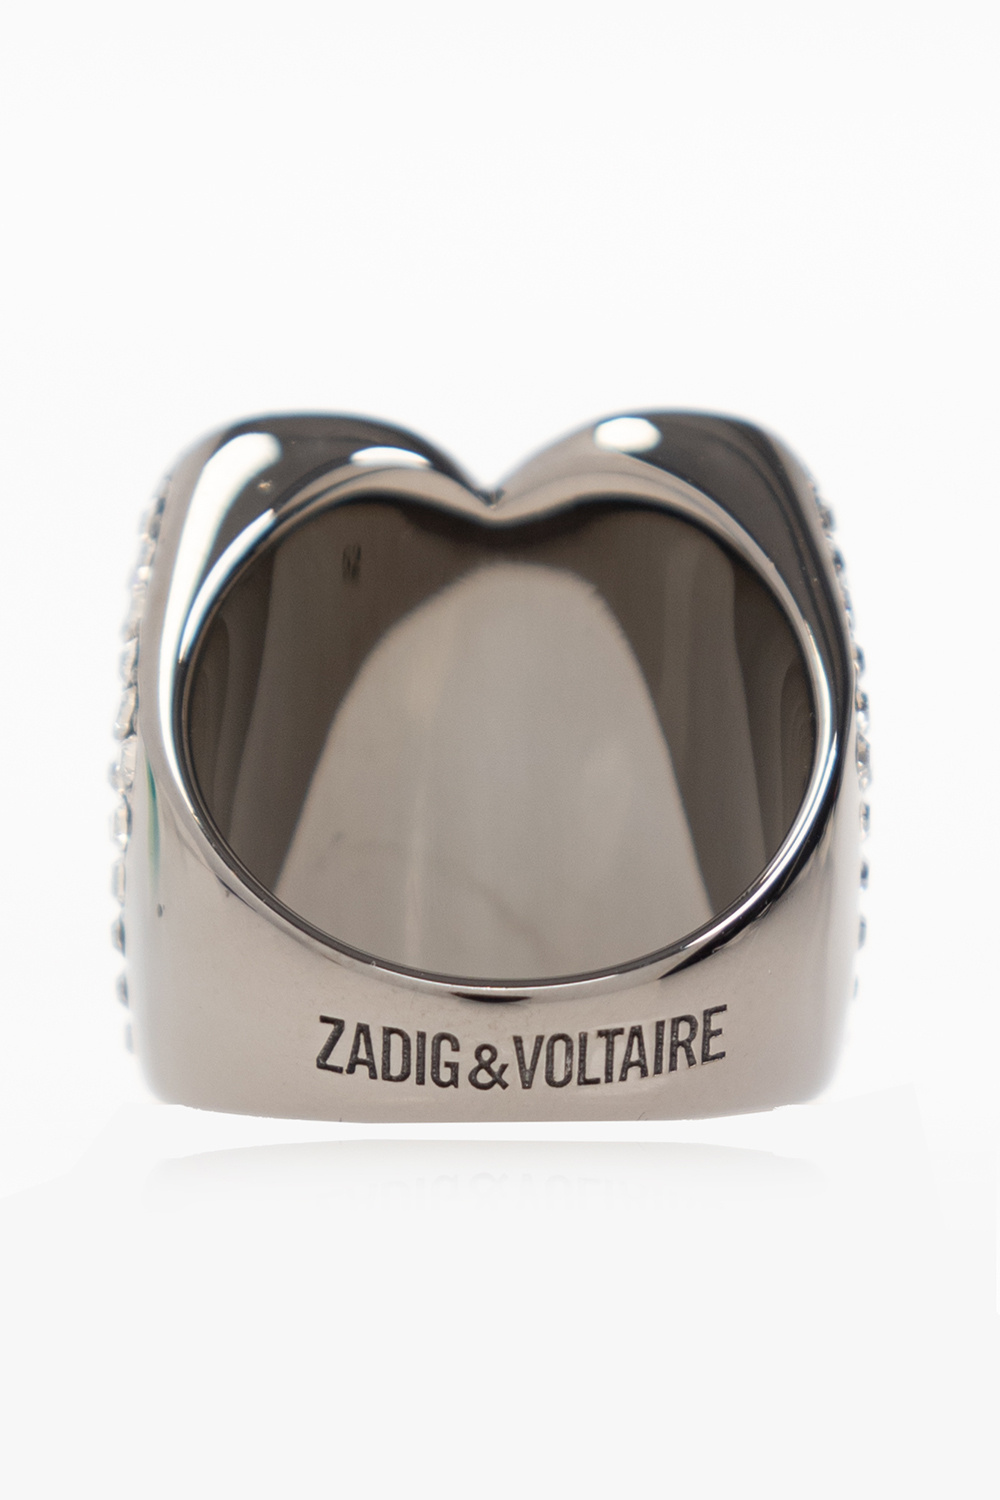 Zadig & Voltaire ‘Idol’ ring